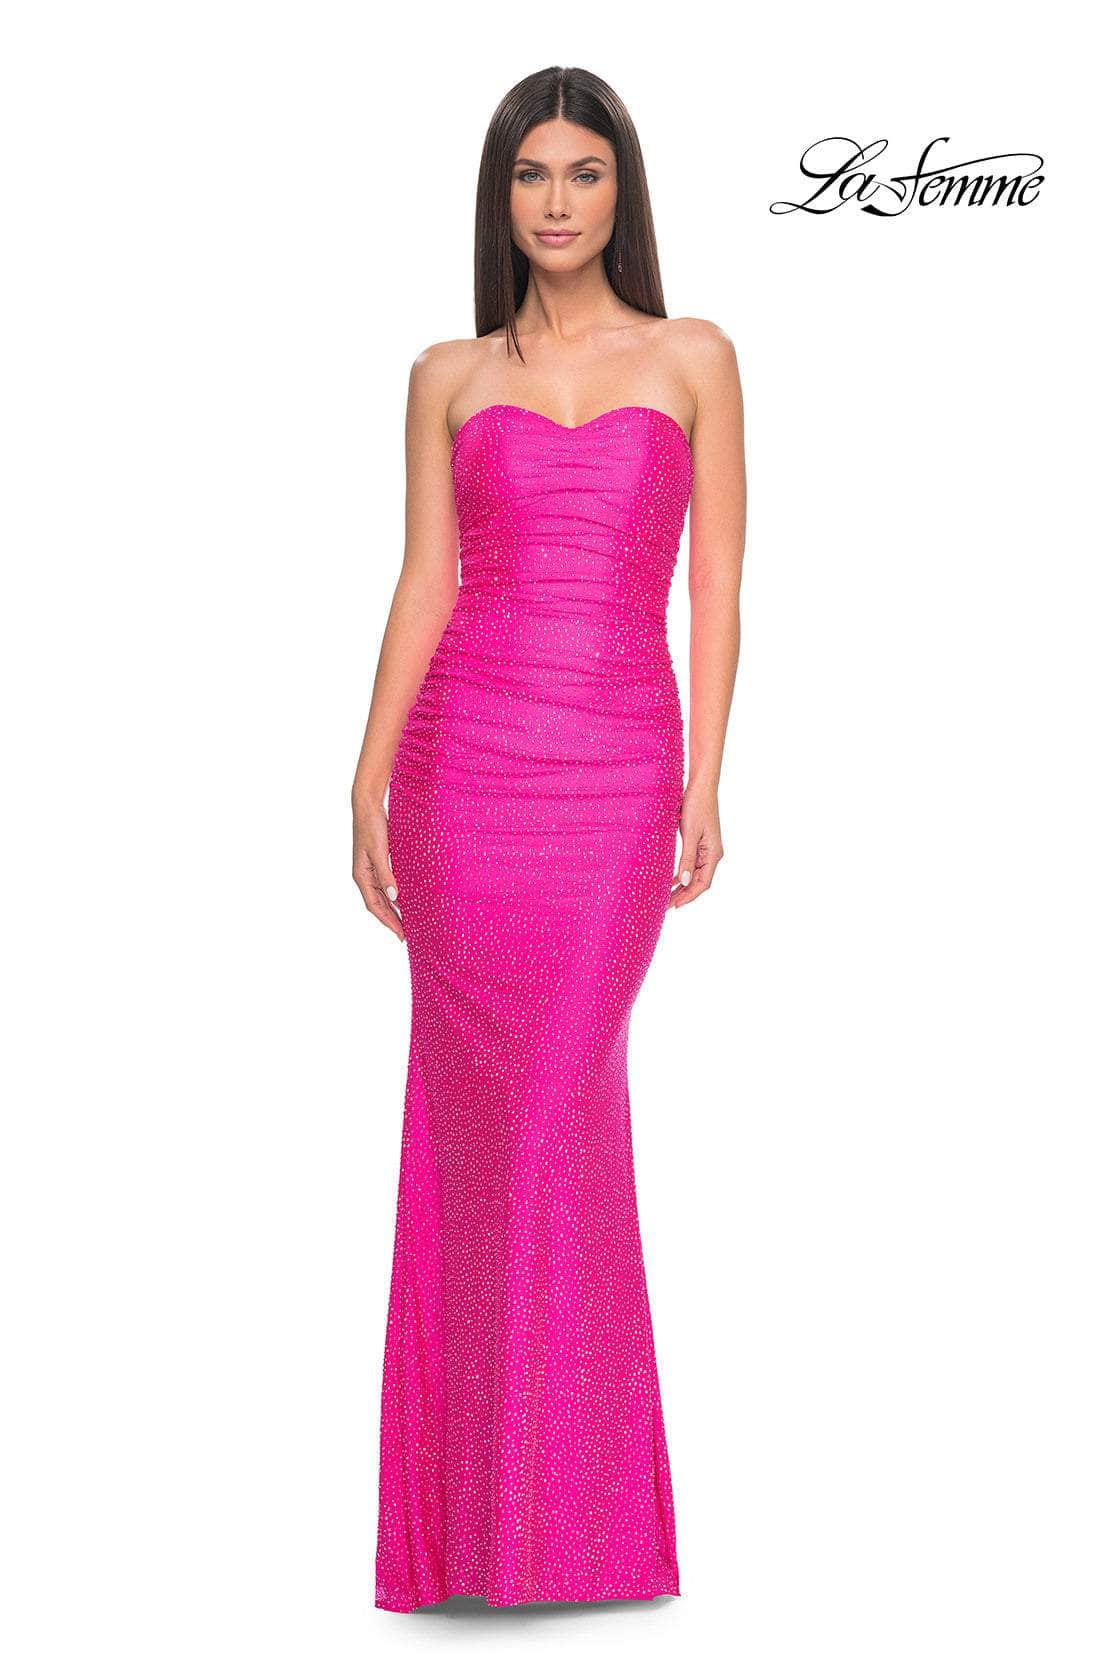 La Femme 32436 - Strapless Sweetheart Neck Prom Gown
